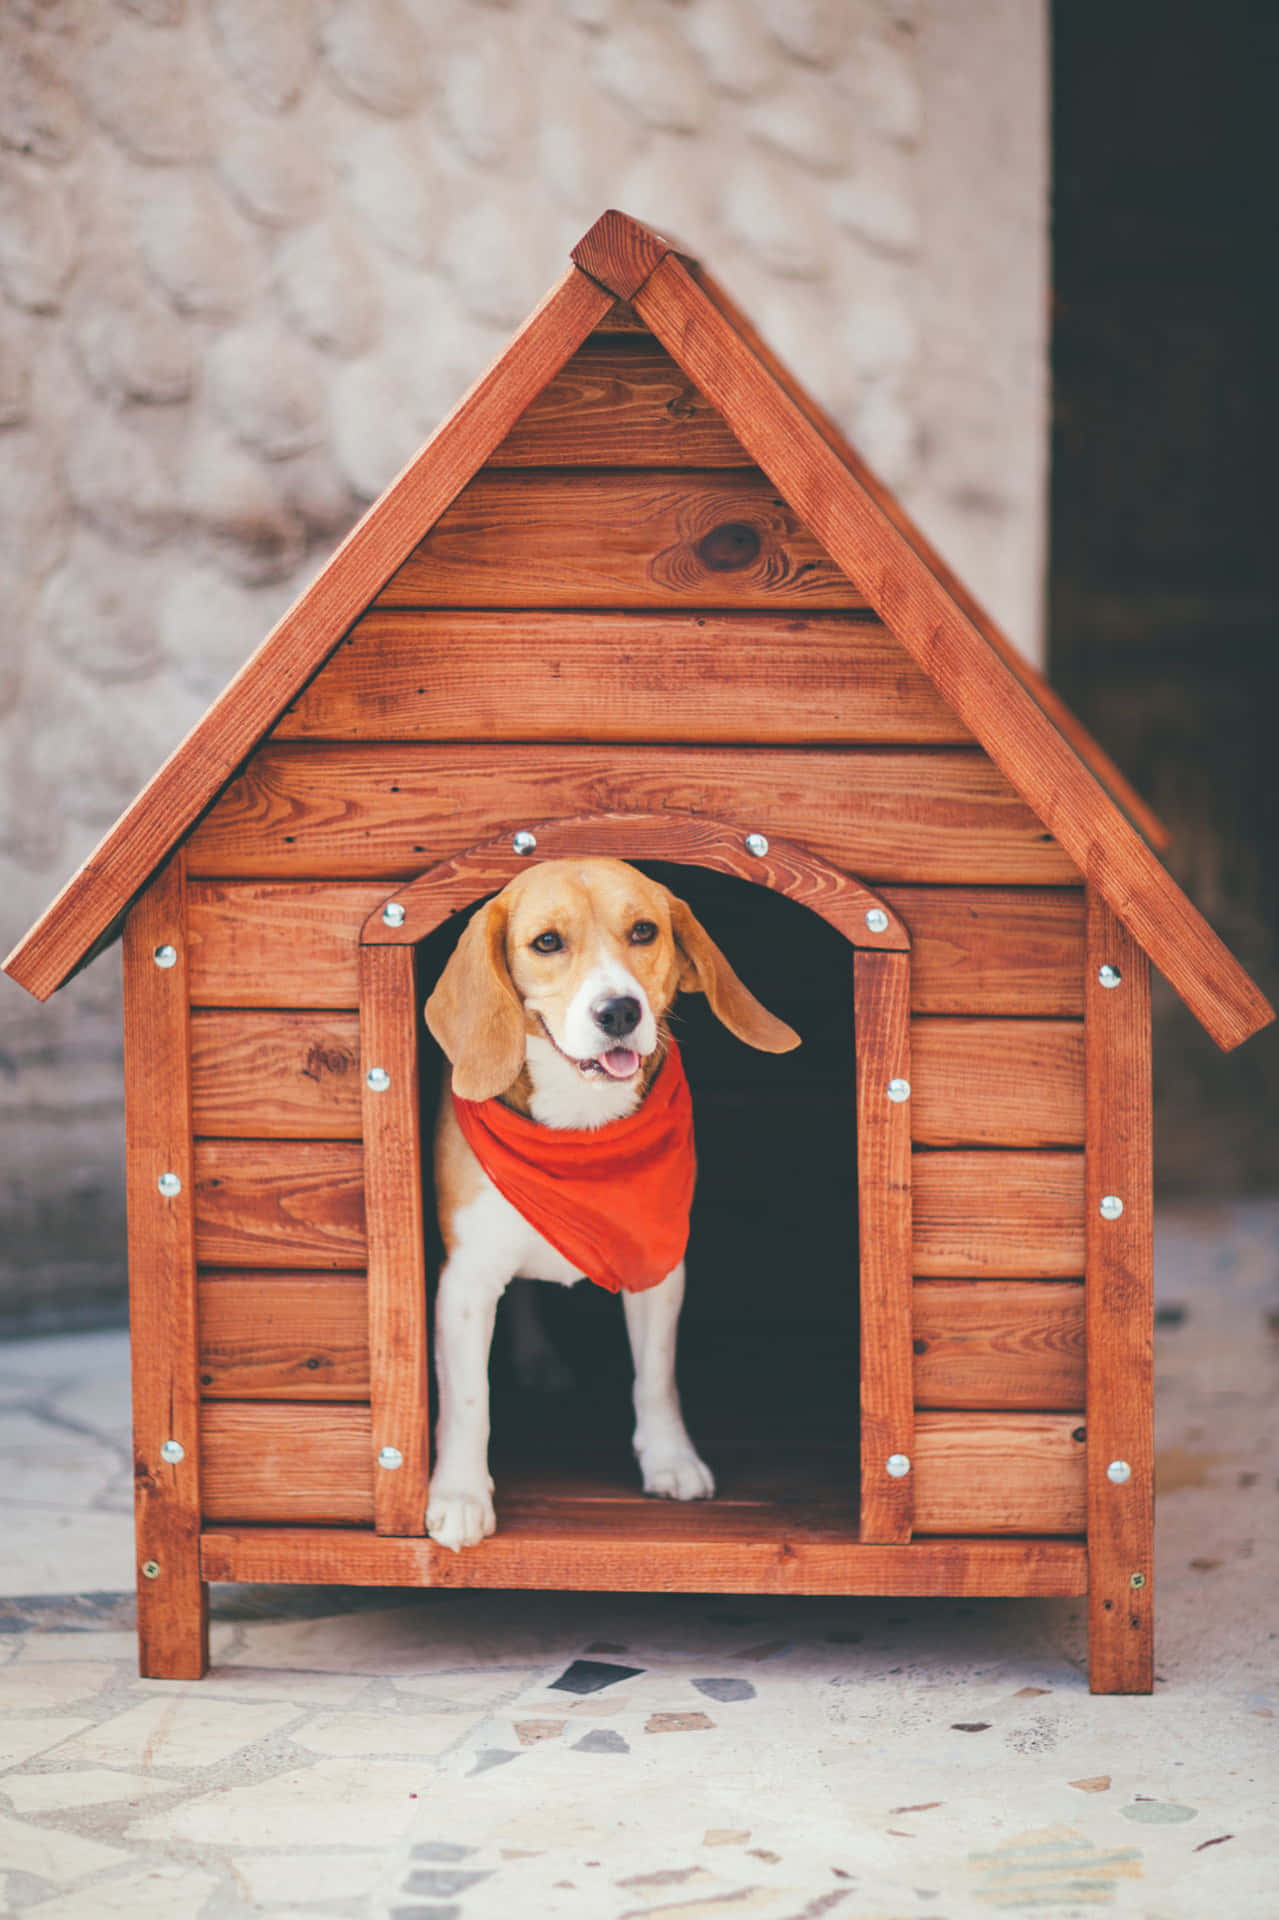 Charming And Cosy Wooden Dog House Nestled In A Scenic Home Garden. Wallpaper